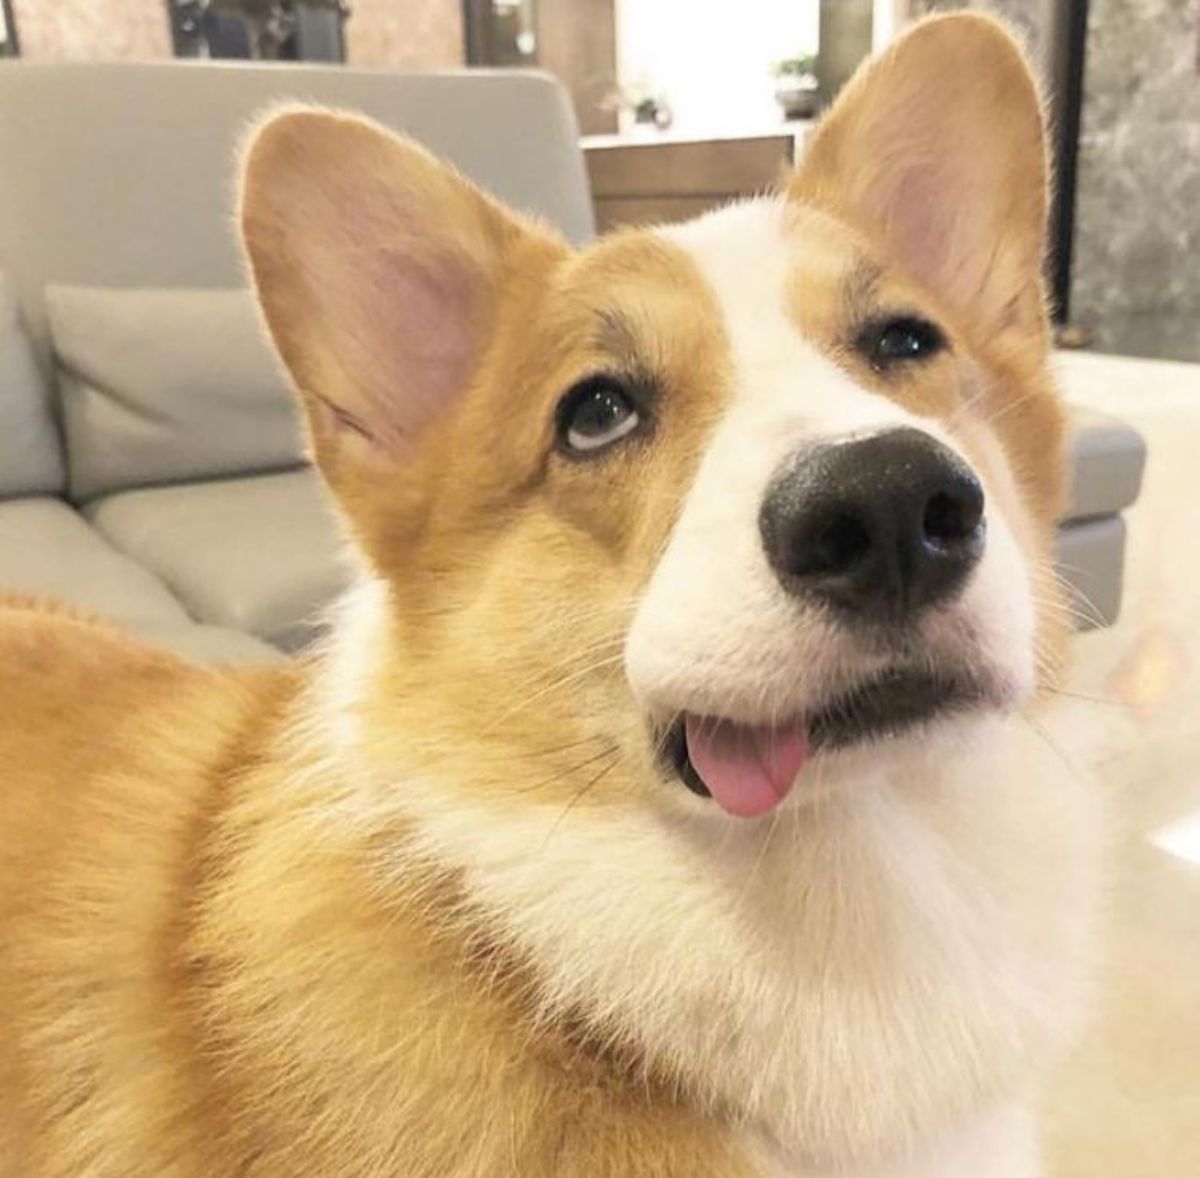 Corgi sticking its tongue out on the side of its mouth while looking up